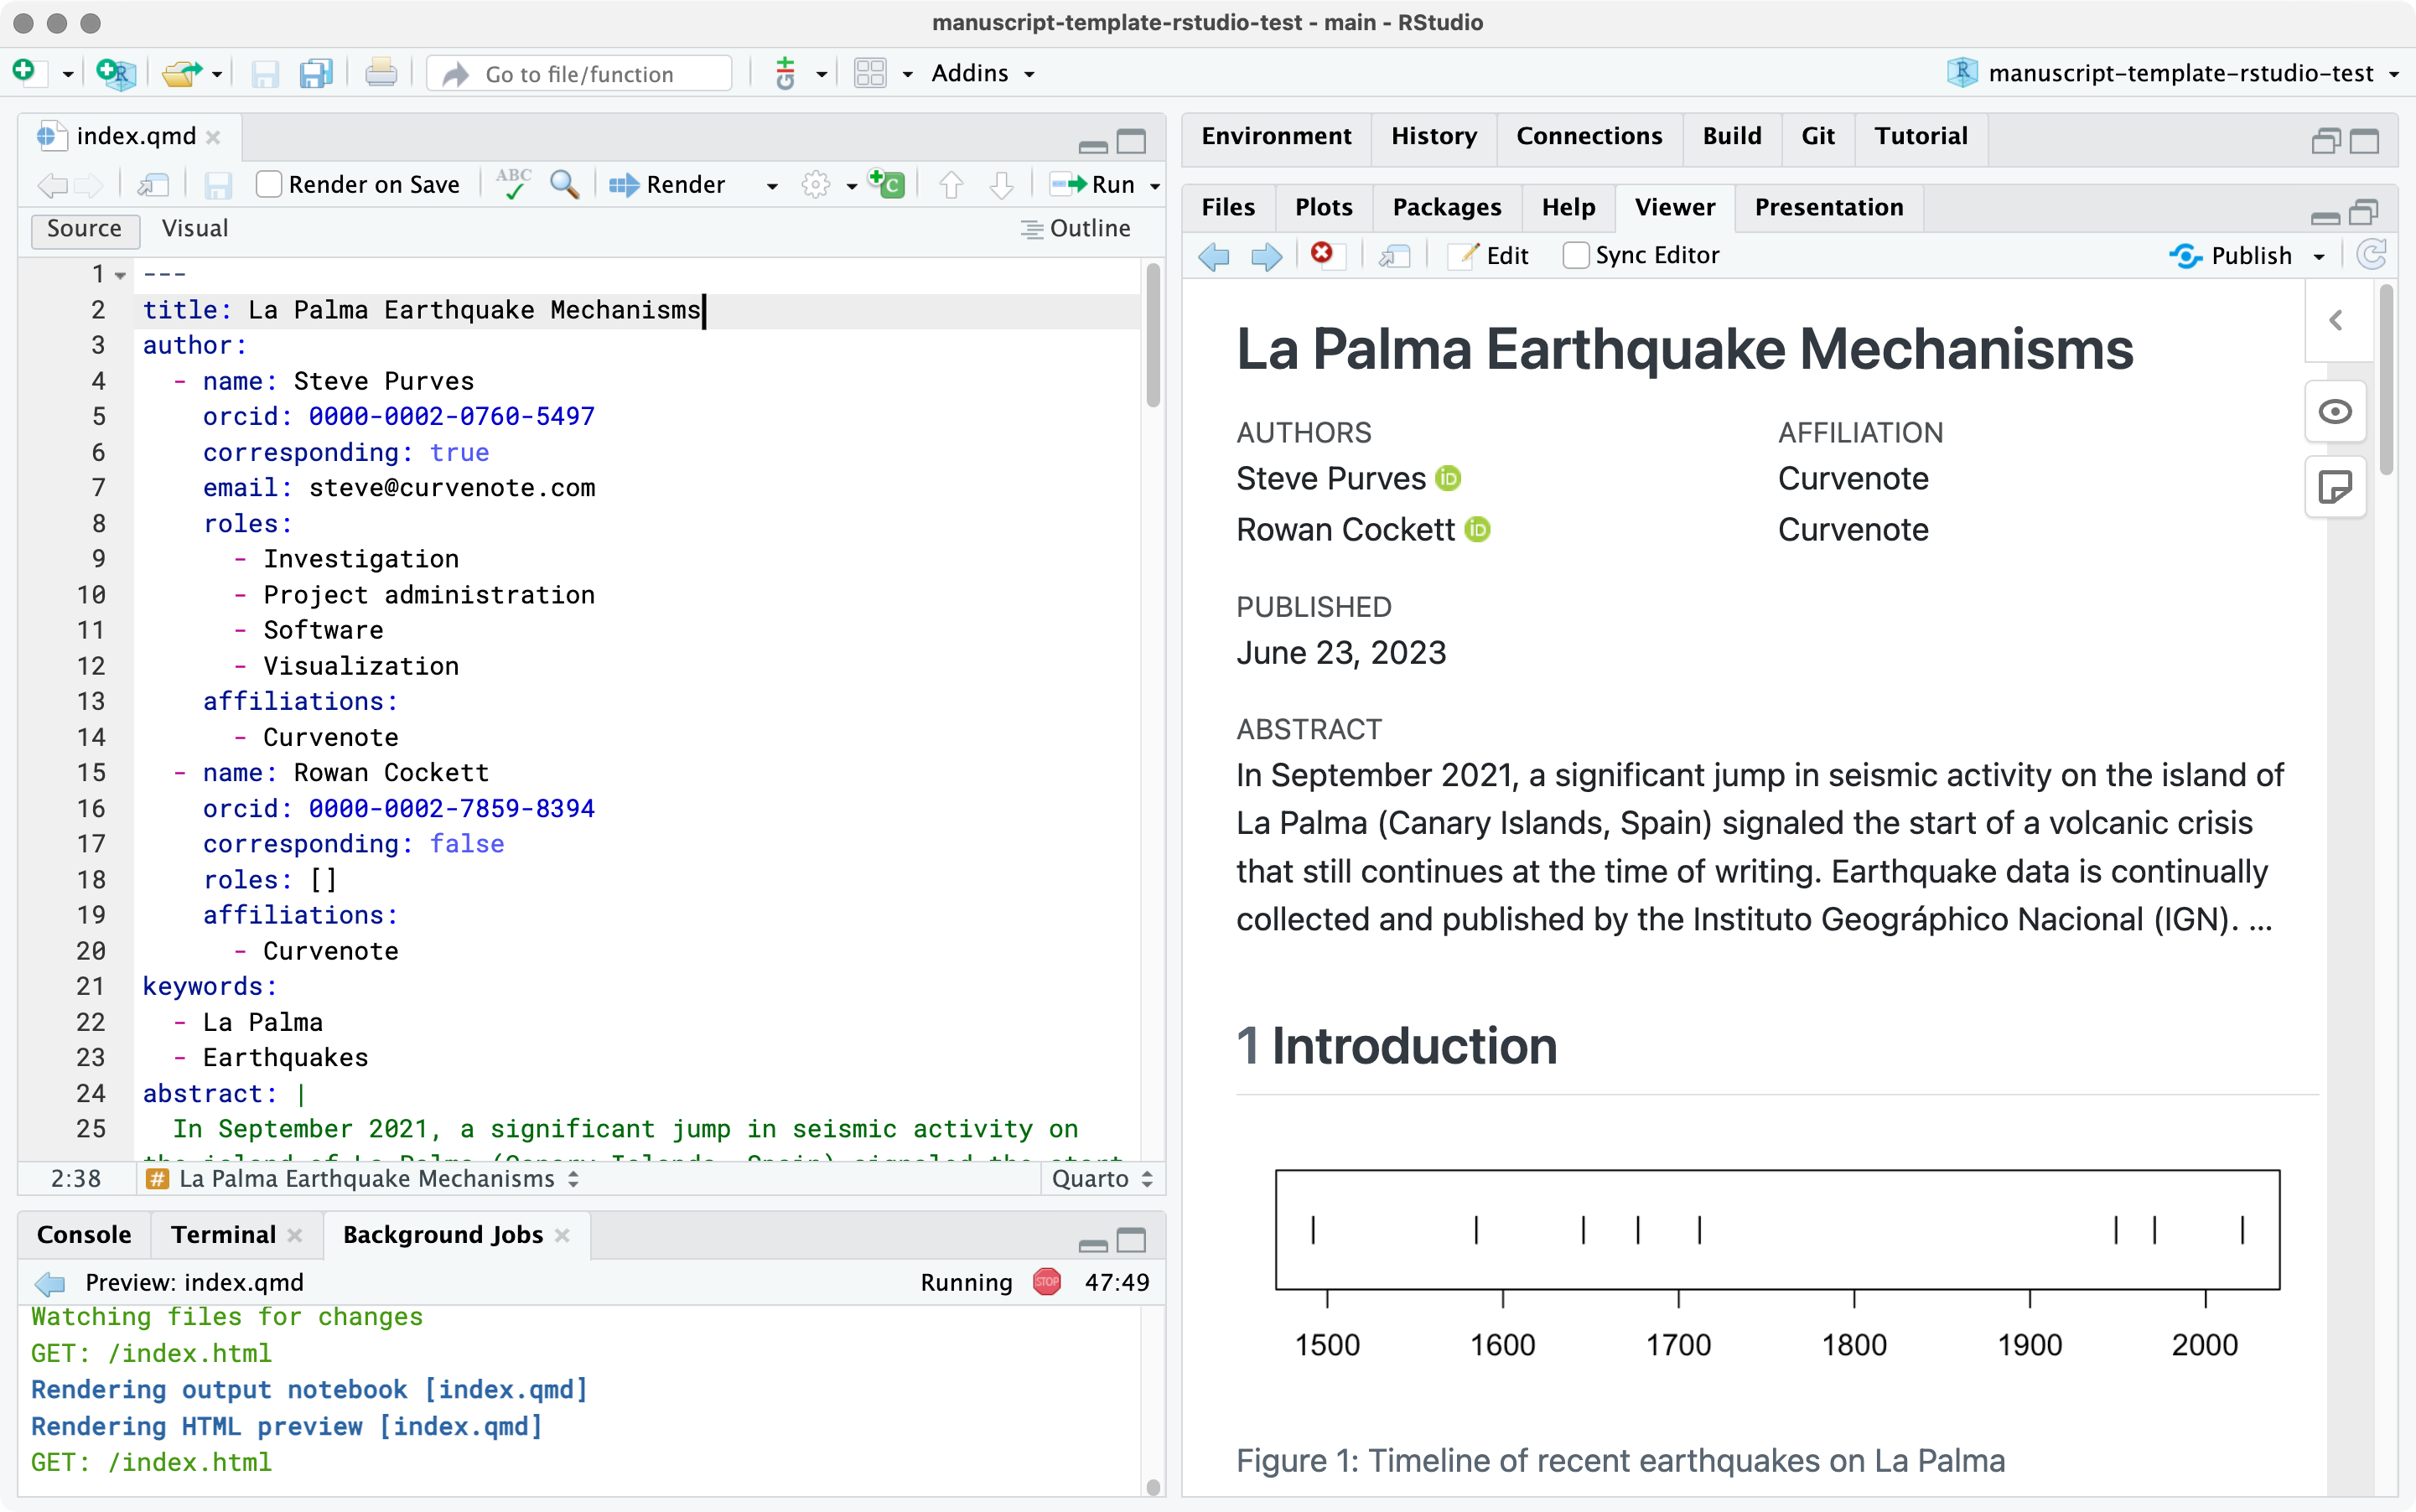 Screenshot of the RStudio IDE. Open in the Source pane is a file called index.qmd with the text, title: La Palma Earthquake Mechanisms. In the Viewer pane is an article webpage with the title La Palma Earthquake Mechanisms.